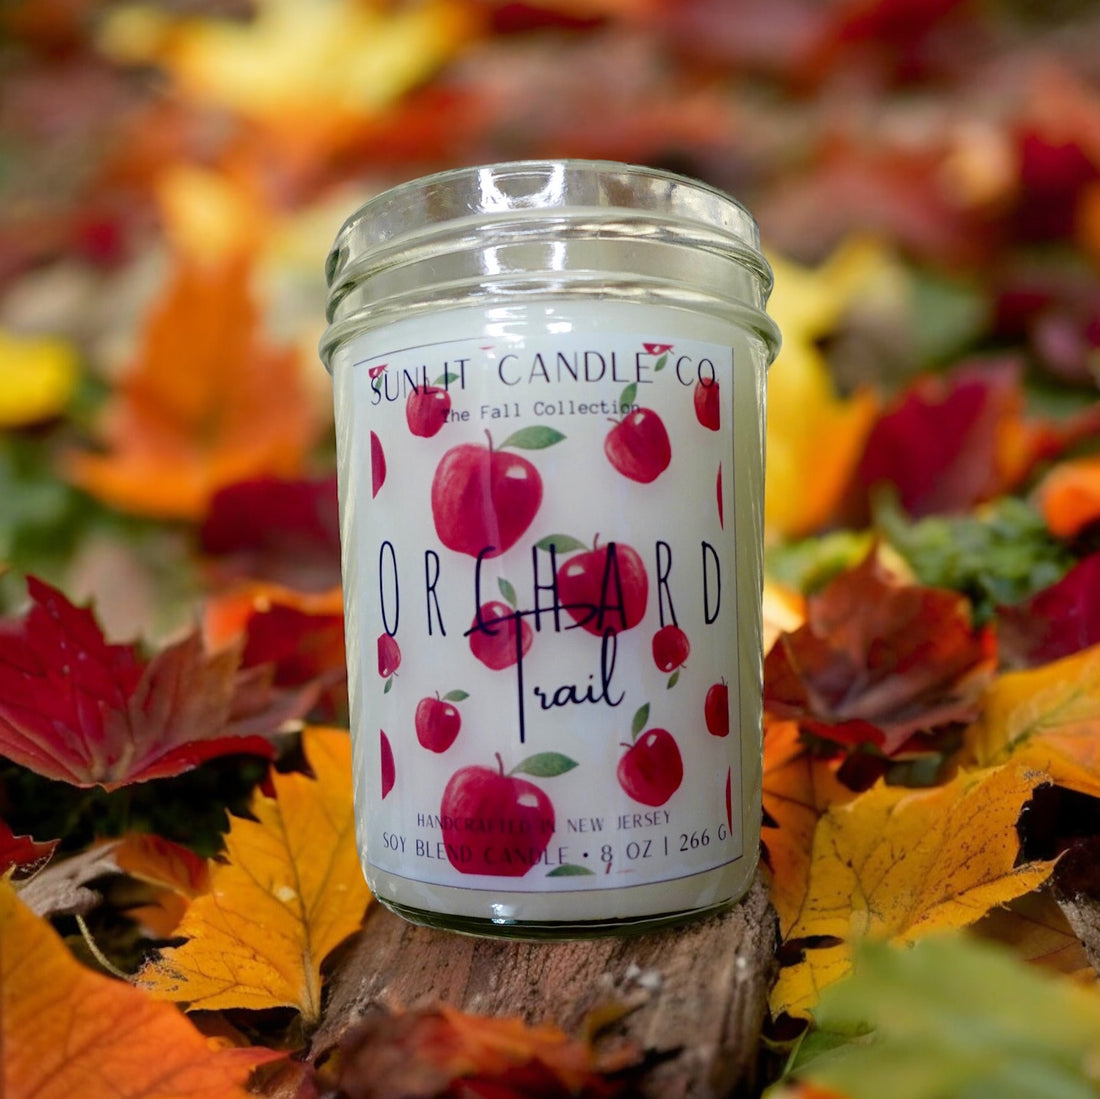  Orchard Trail Candle - SunLit Candle Co.